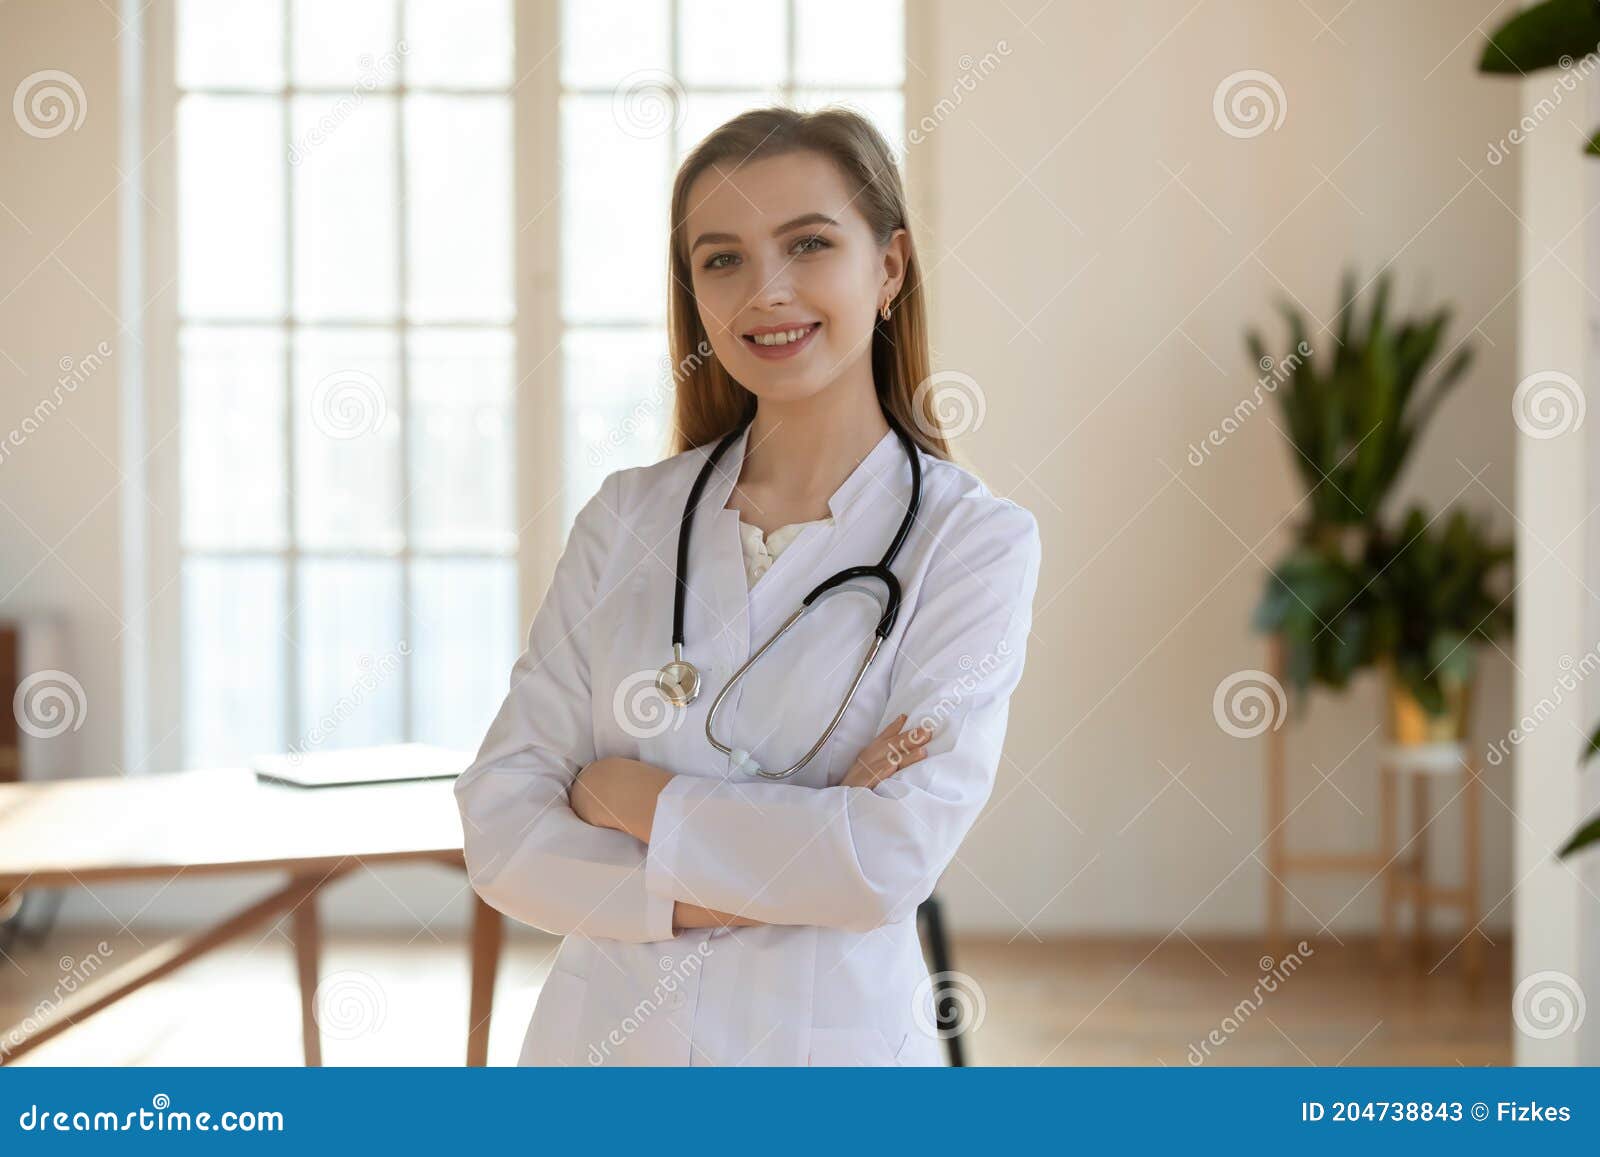 Portrait of a young attractive doctor in white coat with stethoscope posing  in the hospital. Stock Photo by ASphotostudio